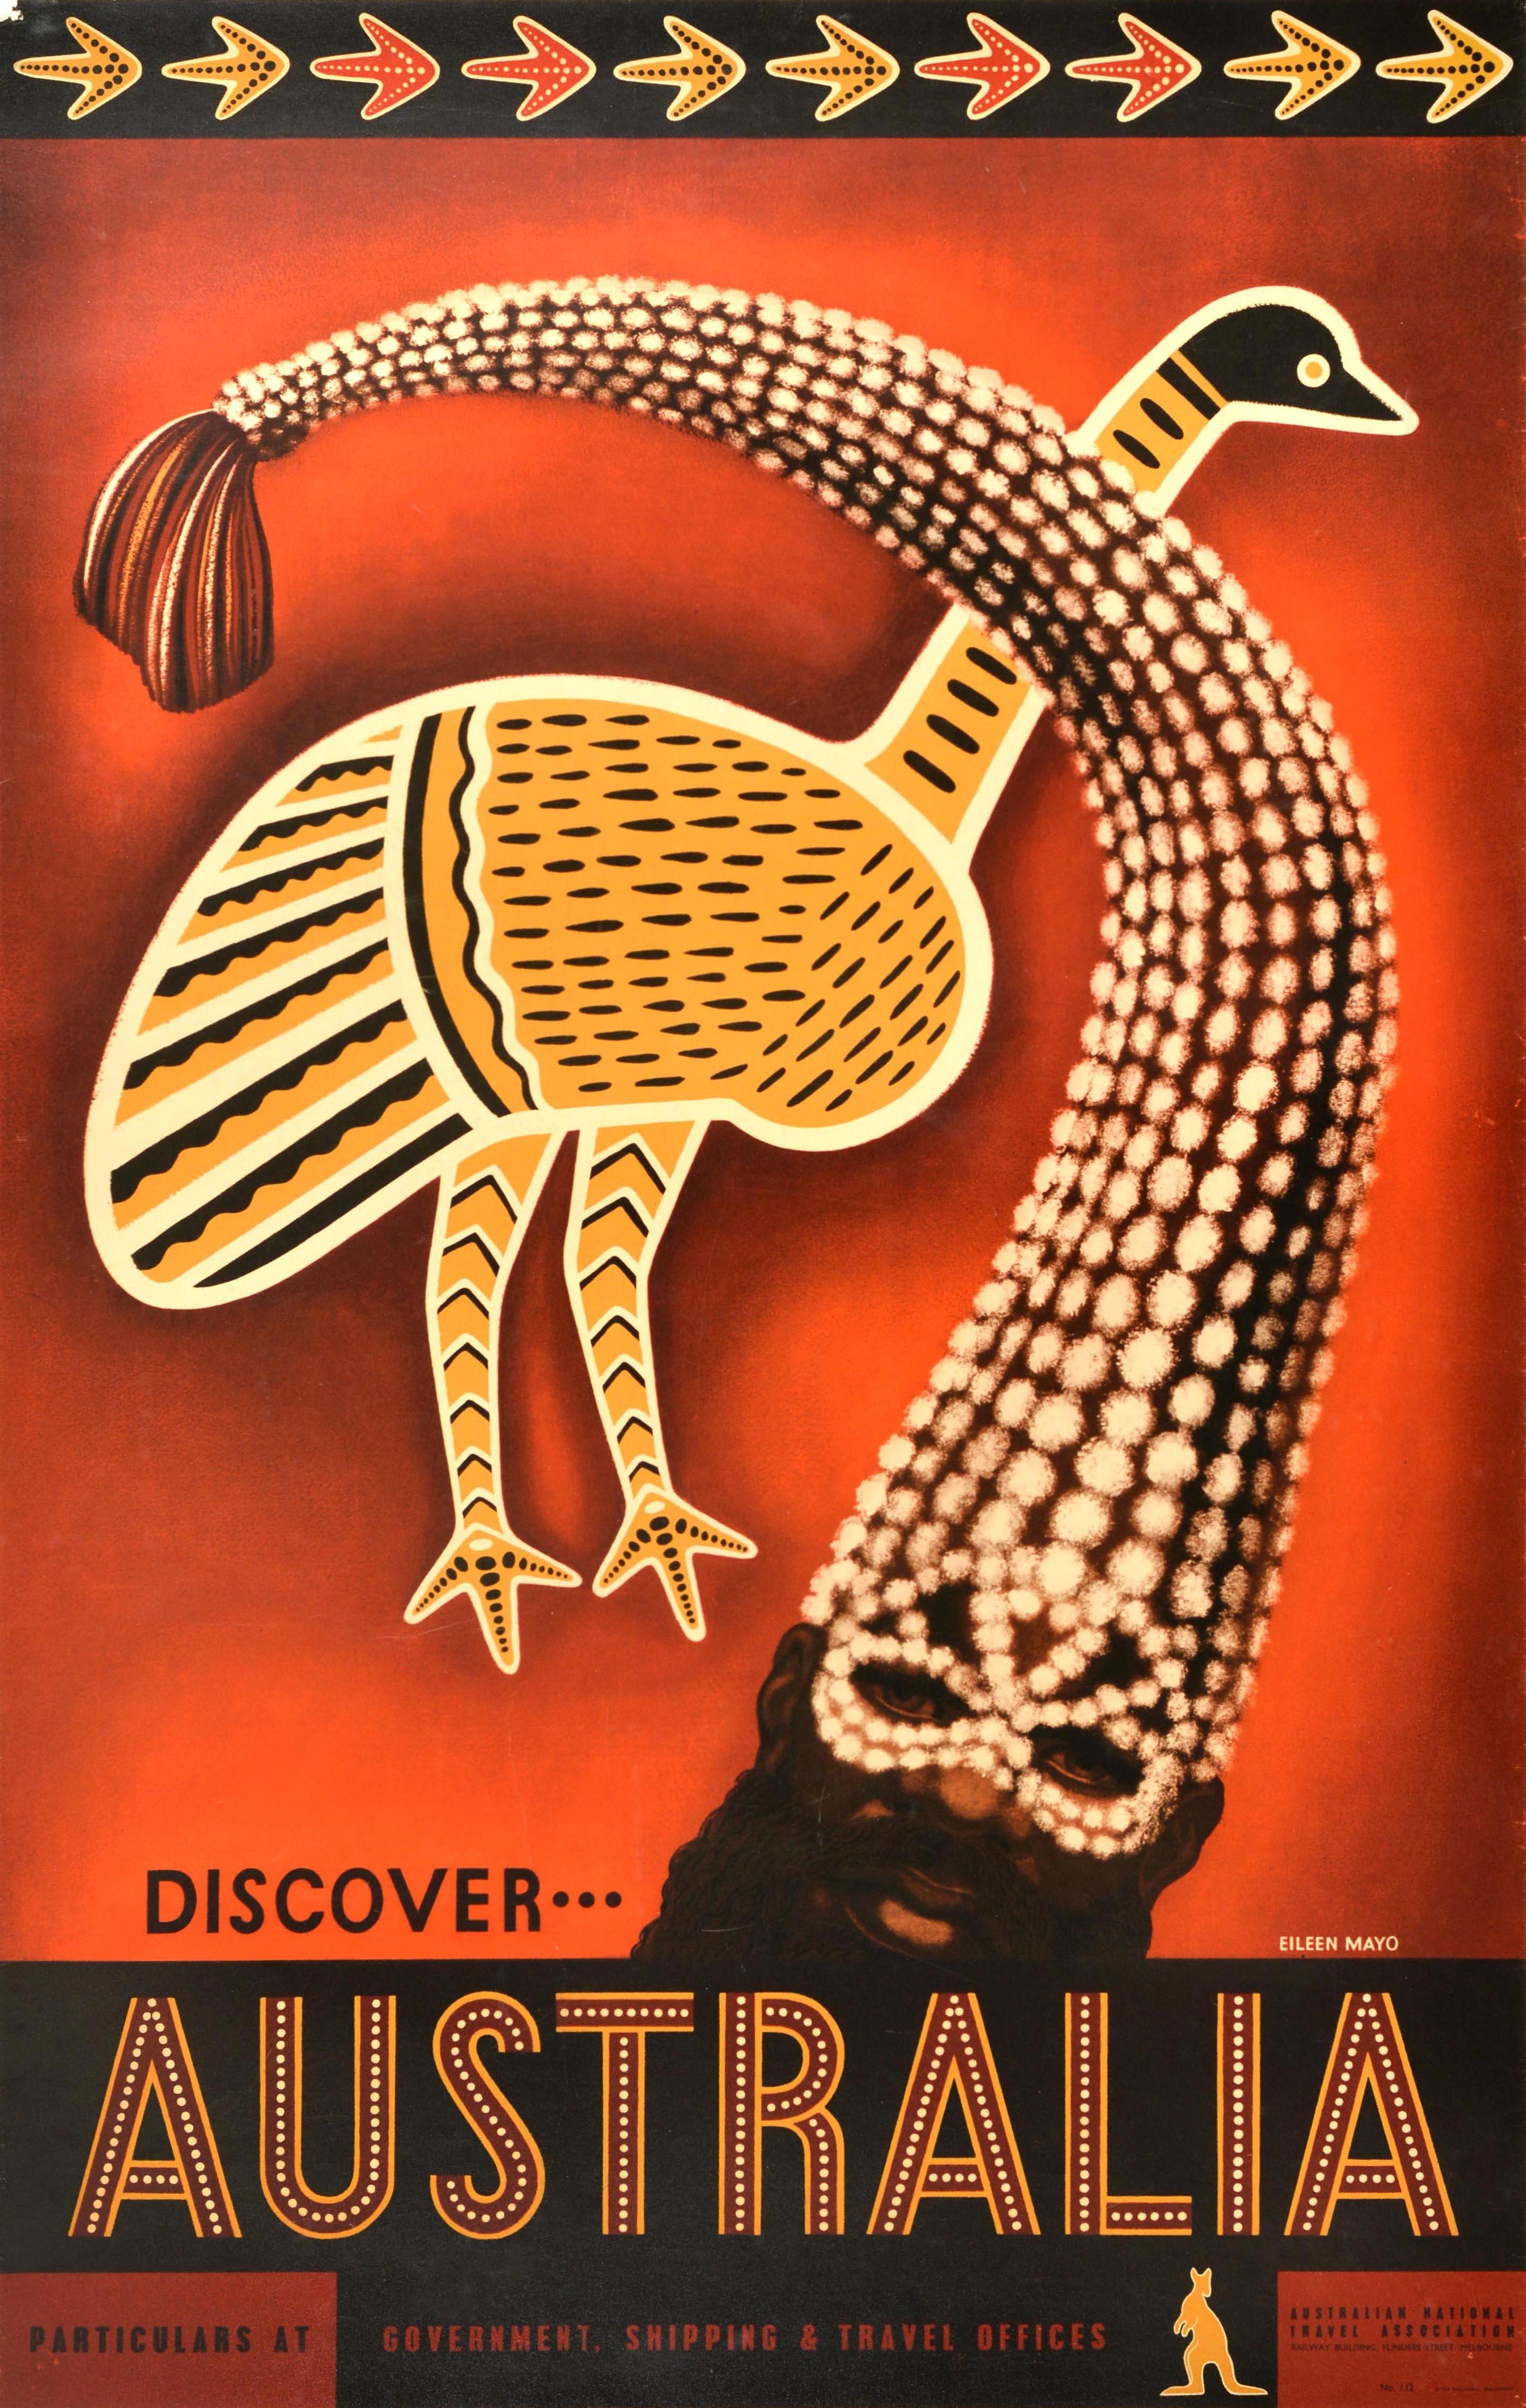 Original vintage travel advertising poster - Discover Australia - issued by the Australian National Travel Association to promote tourism to the country. Fantastic image by Eileen Mayo (1906-1994) featuring traditional artwork and symbols from the